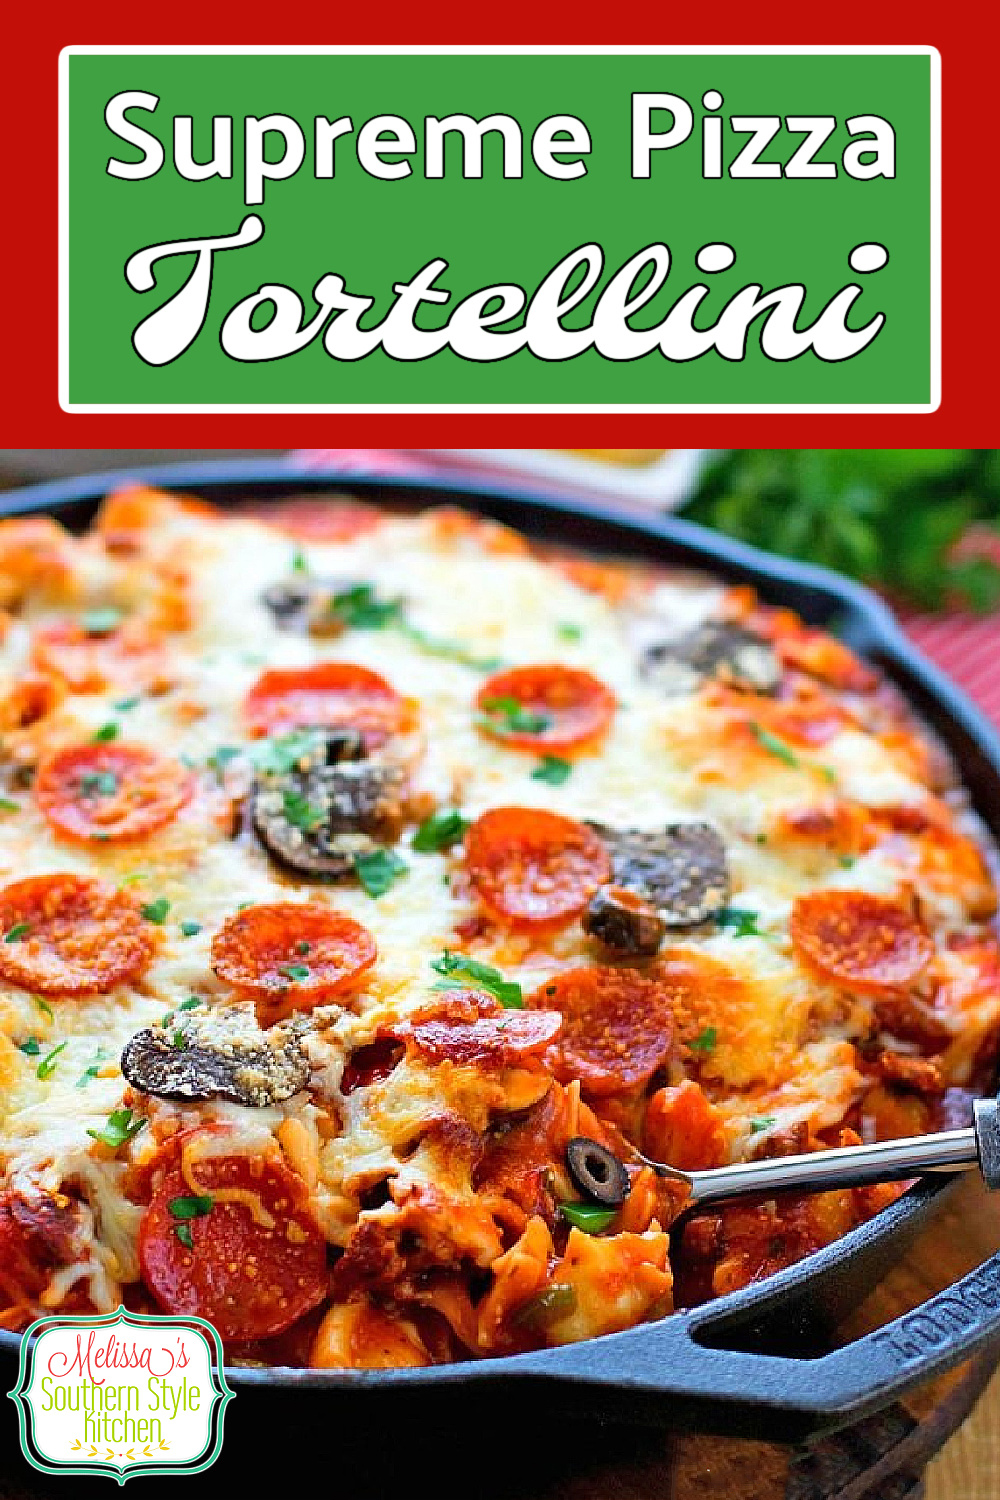 This cheese tortellini bake is a mash-up of pasta and supreme pizza rolled into one delectable meal #supremepizza #supremepizzapasta #cheesetortellini #cheese #pastarecipes #tortellini #casseroles #pasta #dinner #dinnerideas #italianfood #southernrecipes #southernfood #italiansausage via @melissasssk